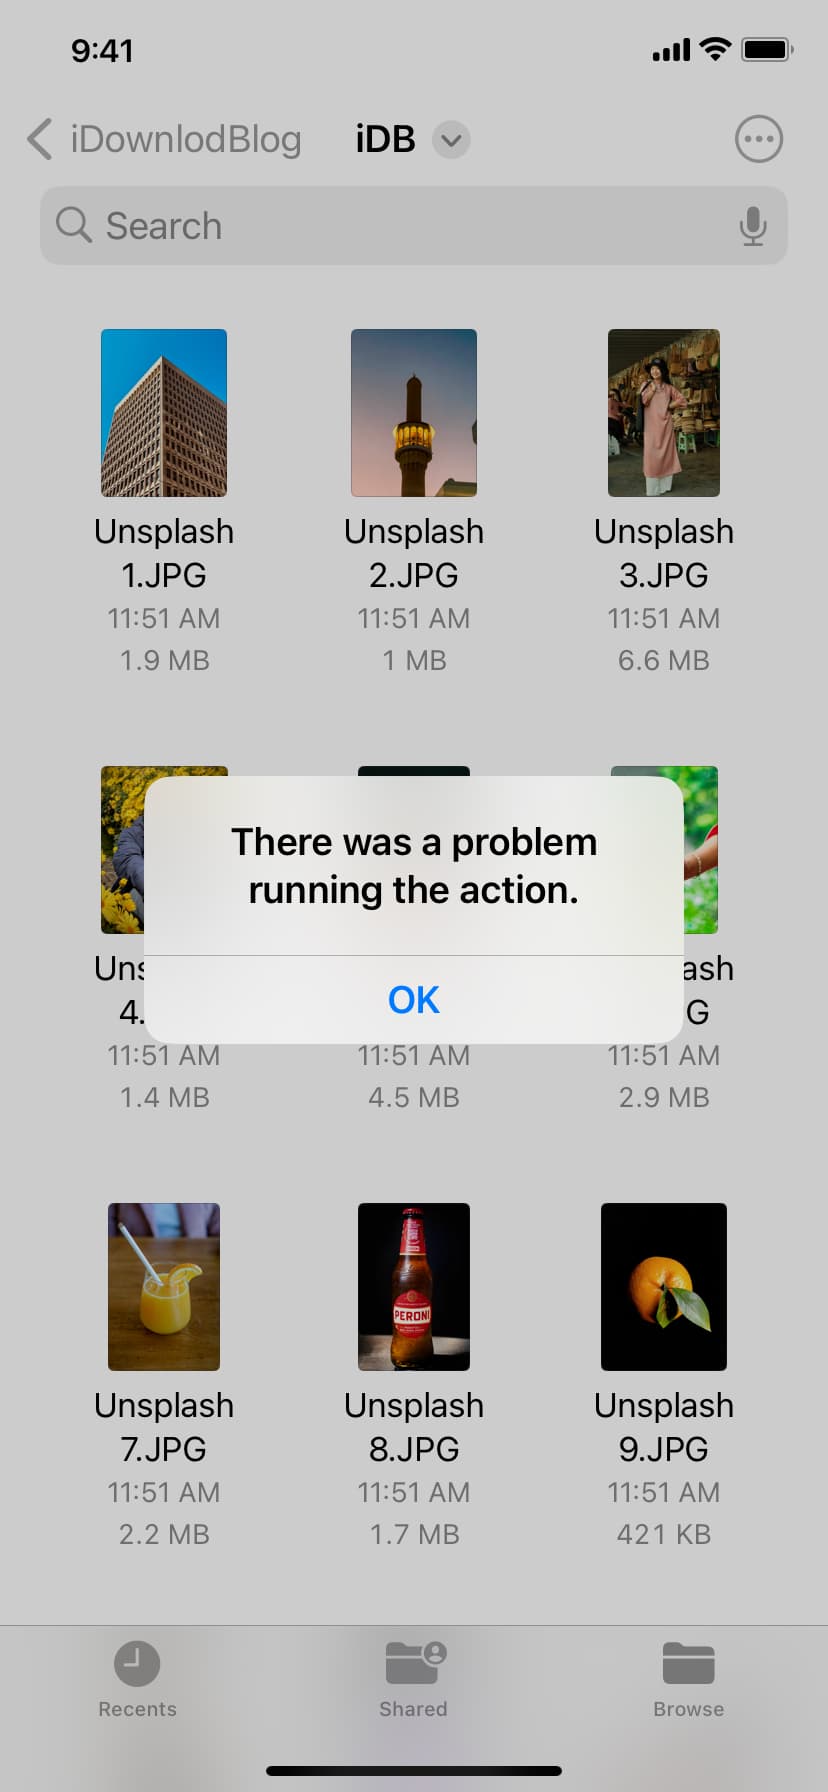 There was a problem running the action error in iPhone Files app